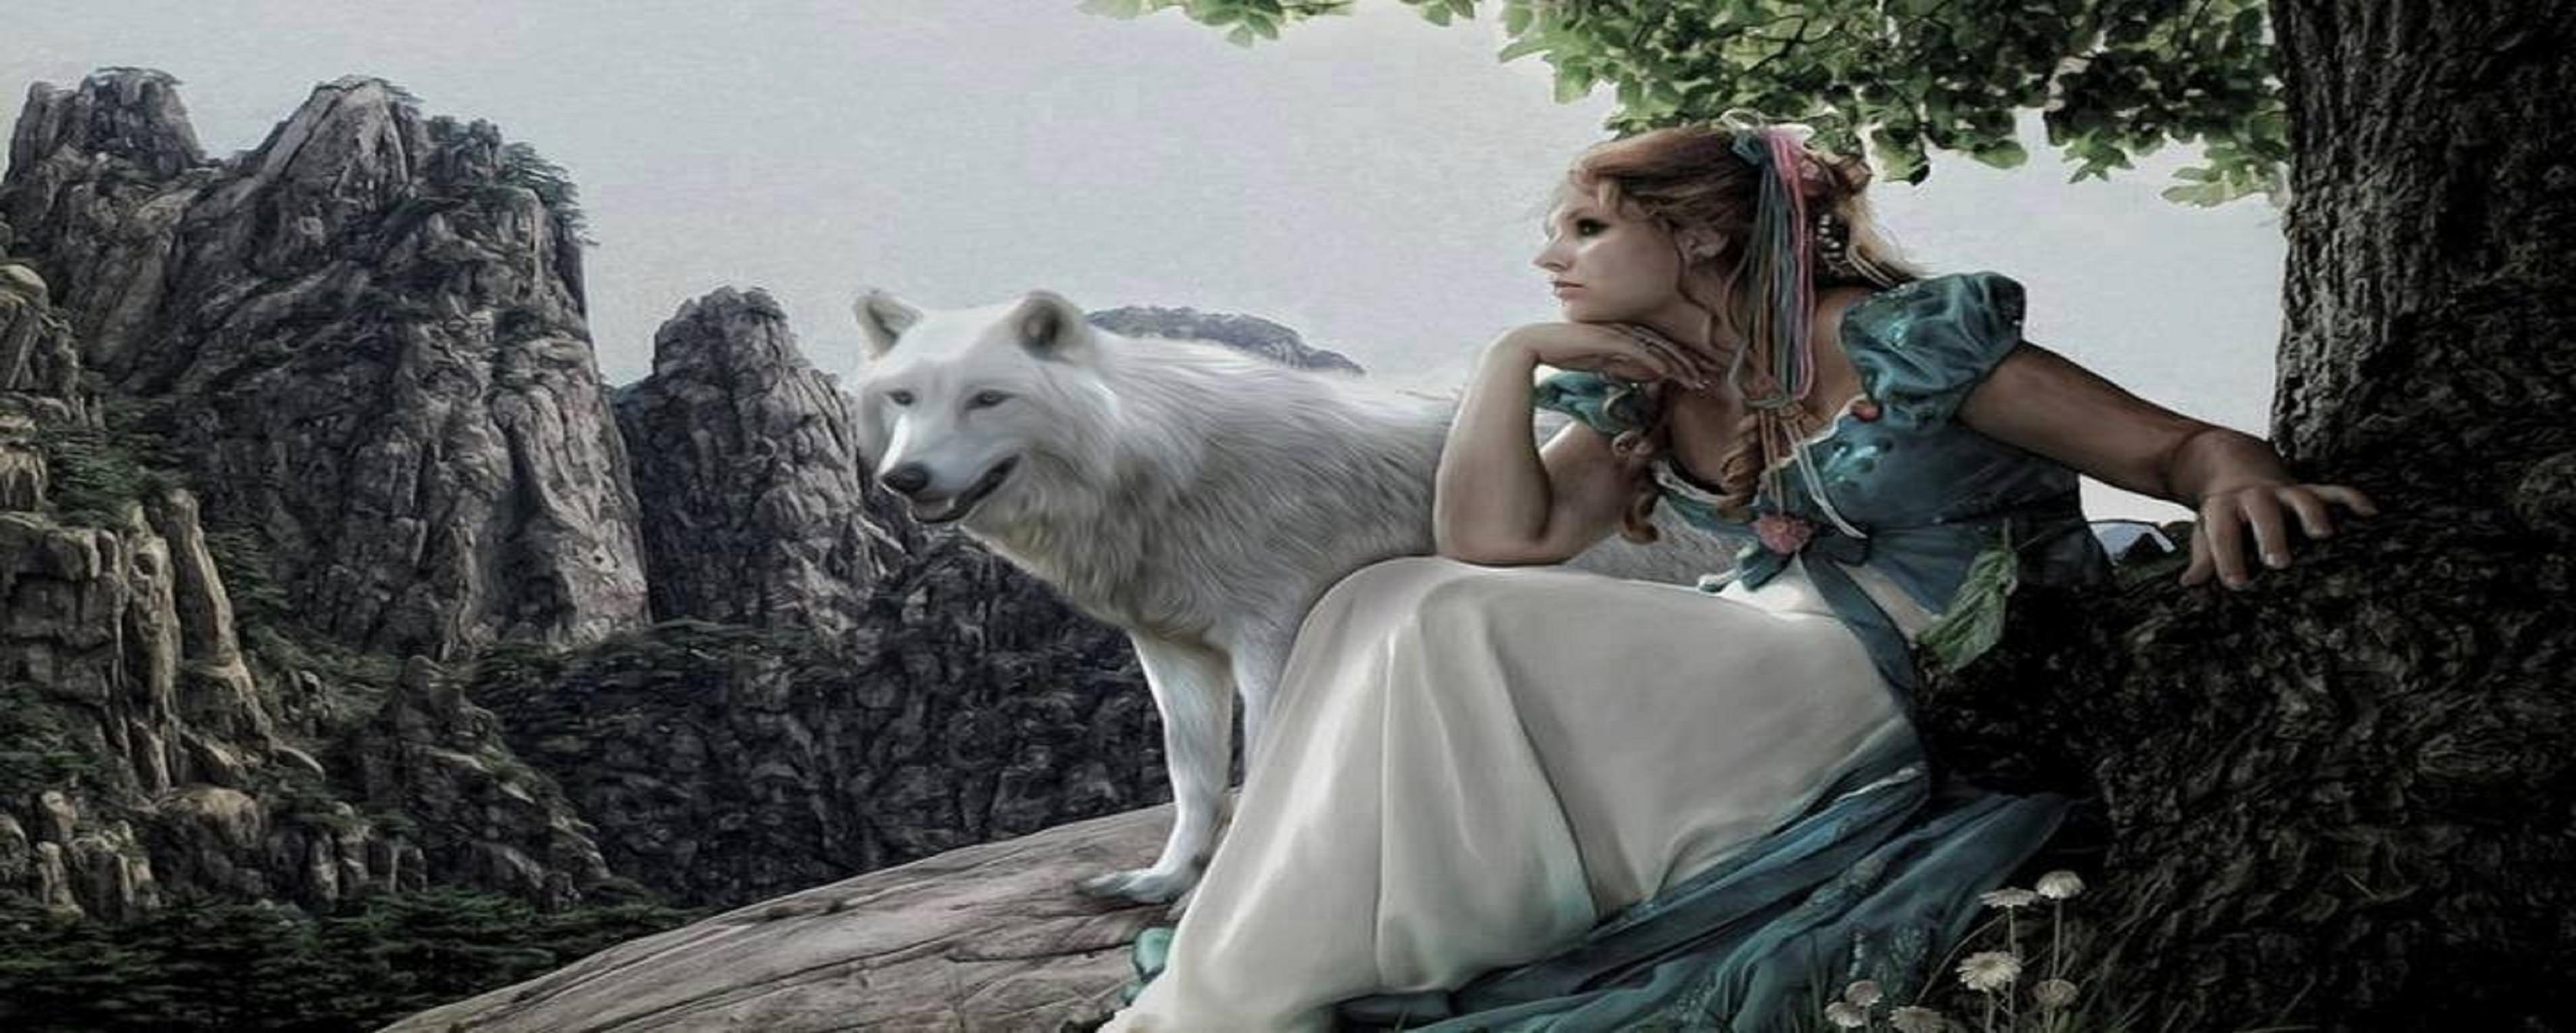 Girl With Wolf High Quality And Resolution Wallpaper On